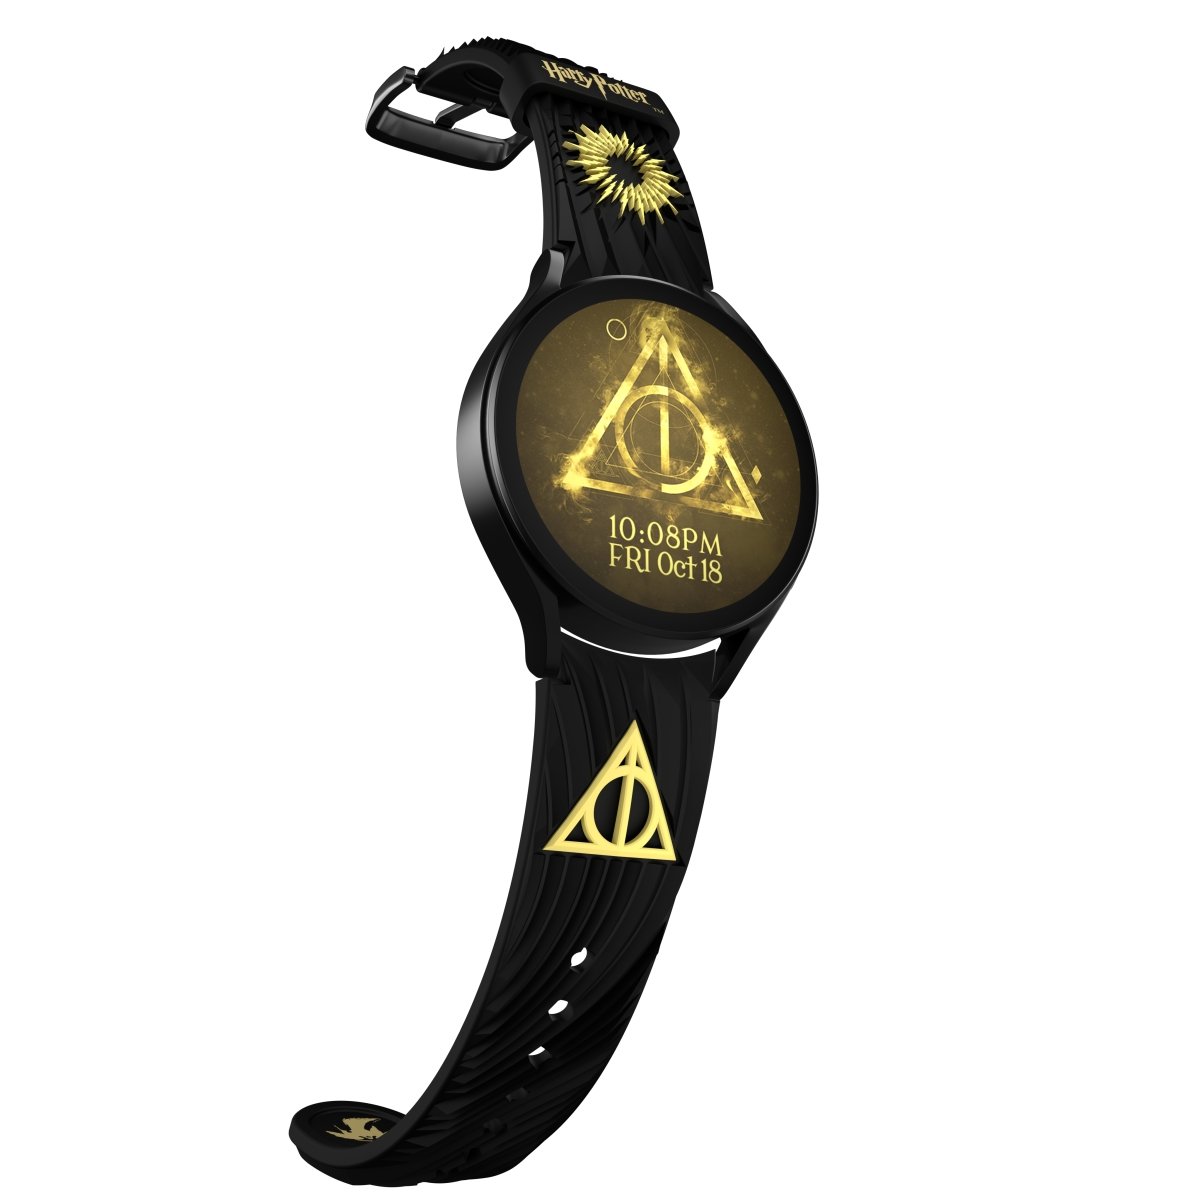 Harry potter wrist watch black band Harry flying on broom silver tone HP0025